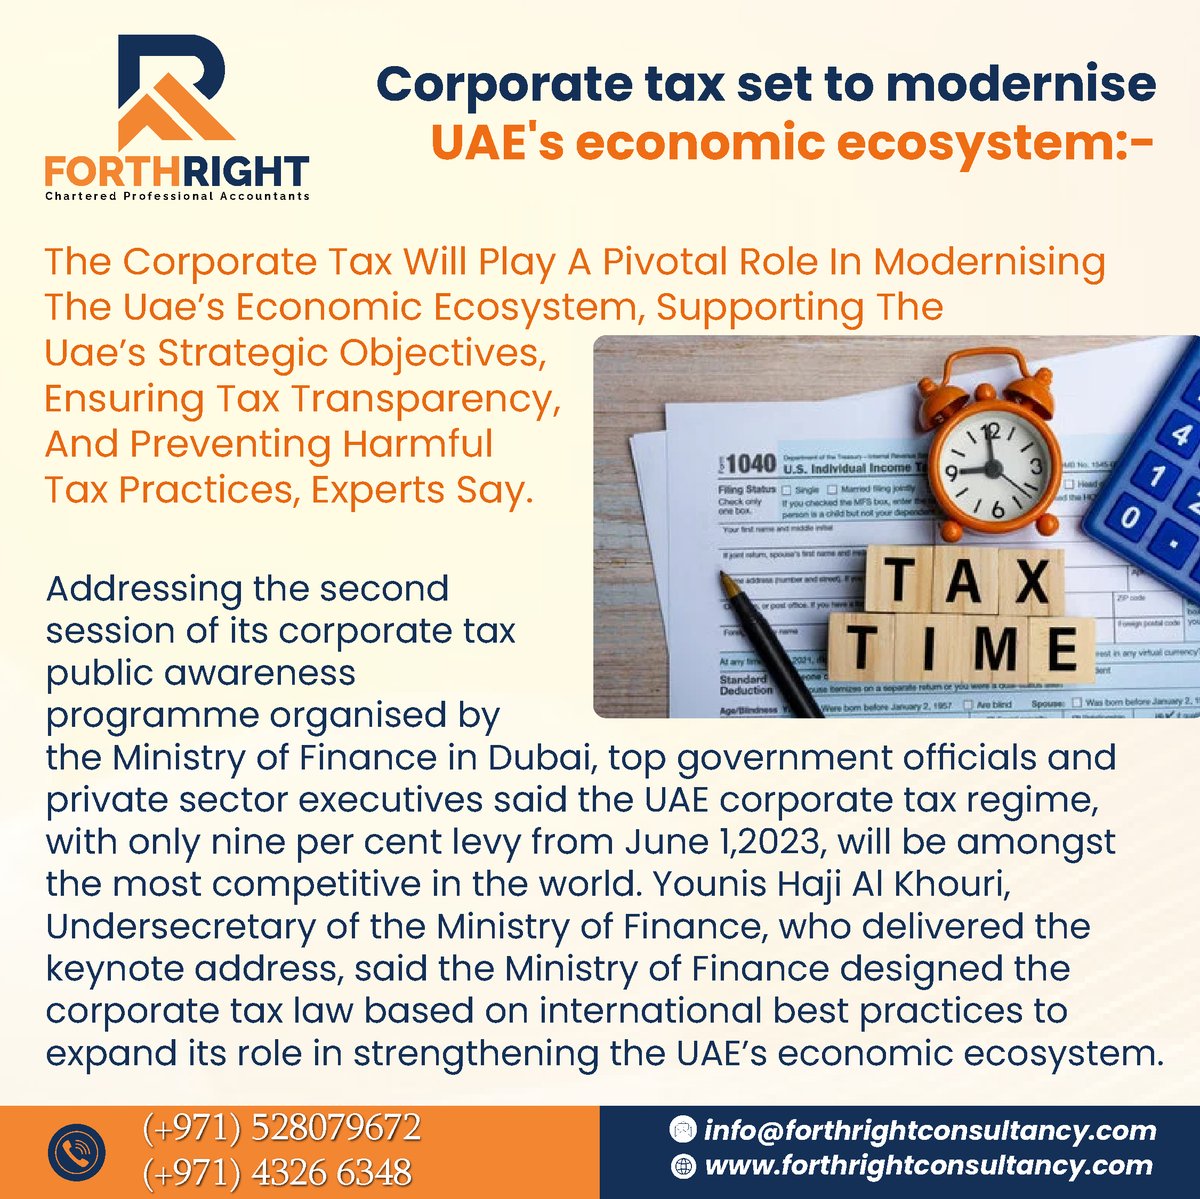 Corporate tax set to modernise UAE's economic ecosystem:-
.
📞Call us now (+971) 43266348, (+971) 52 807 9672
.
.
#forthrightcompany #forthrightconsultancyinuae #tax #penalty #itconsultant #freeconsultation  #corporatetax #taxes #dubaitax #corporatetaxuae #taxrateupdates